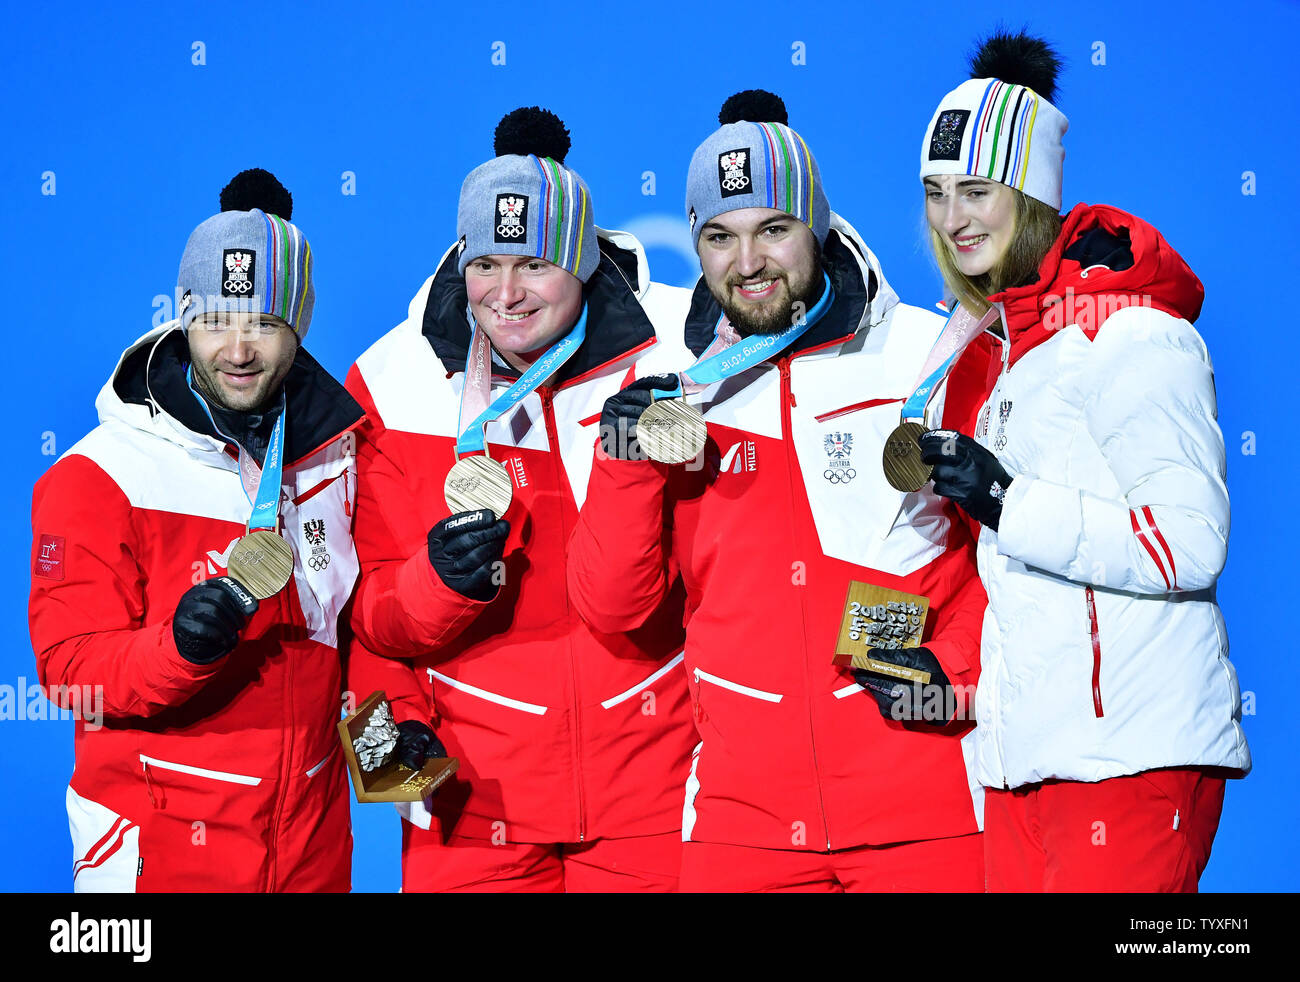 Bronze medalist Austria's Madeleine Egle, David Gleirscher, Peter Penz and Georg Fischler pose during the medal ceremony for Luge Team Relay at the Pyeongchang 2018 Winter Olympics in Pyeongchang, South Korea, on February 16, 2018. Photo by Kevin Dietsch/UPI Stock Photo